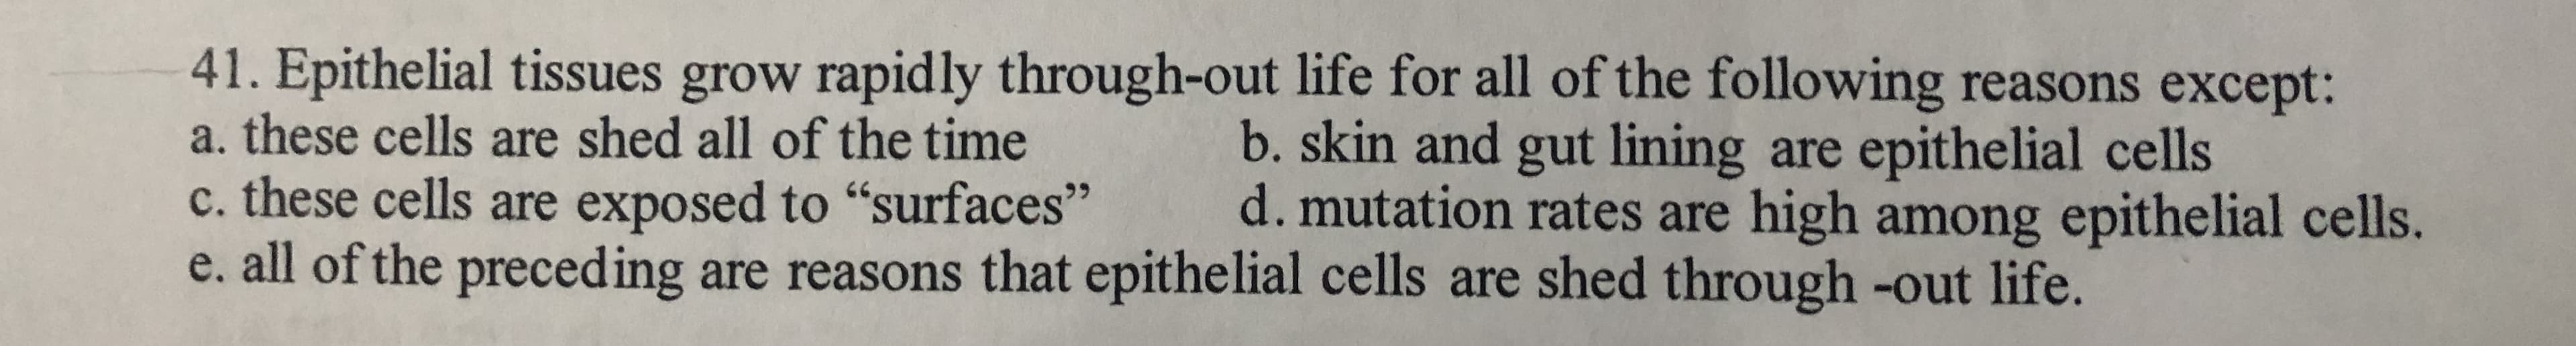 41. Epithelial tissues grow rapidly through-out life for all of the following reasons except:
a. these cells are shed all of the time
c. these cells are exposed to "surfaces"
e. all of the preceding are reasons that epithelial cells are shed through -out life.
b. skin and gut lining are epithelial cells
d. mutation rates are high among epithelial cells.
